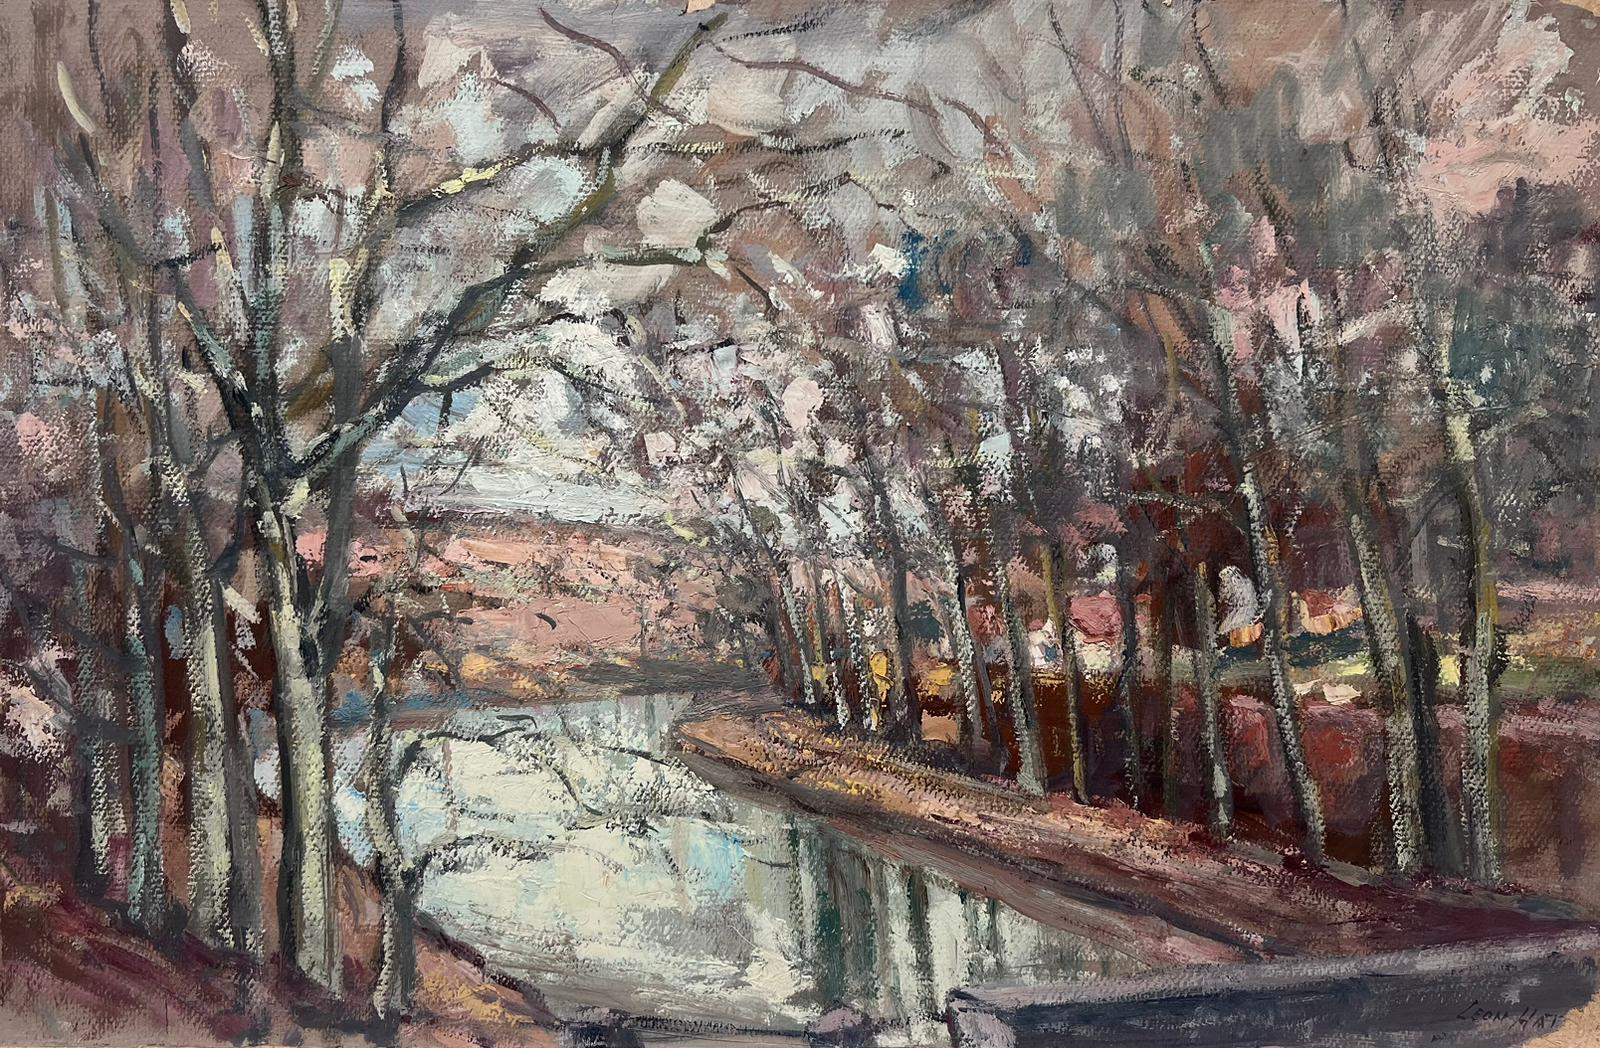 Artist/ School: Leon Hatot (French 1883-1953)

Title: Impressionist oil painting 

Medium: signed oil painting on thick paper, stuck on board unframed.

Size: painting: 13 x 20 inches

Provenance: all the paintings we have for sale by this artist